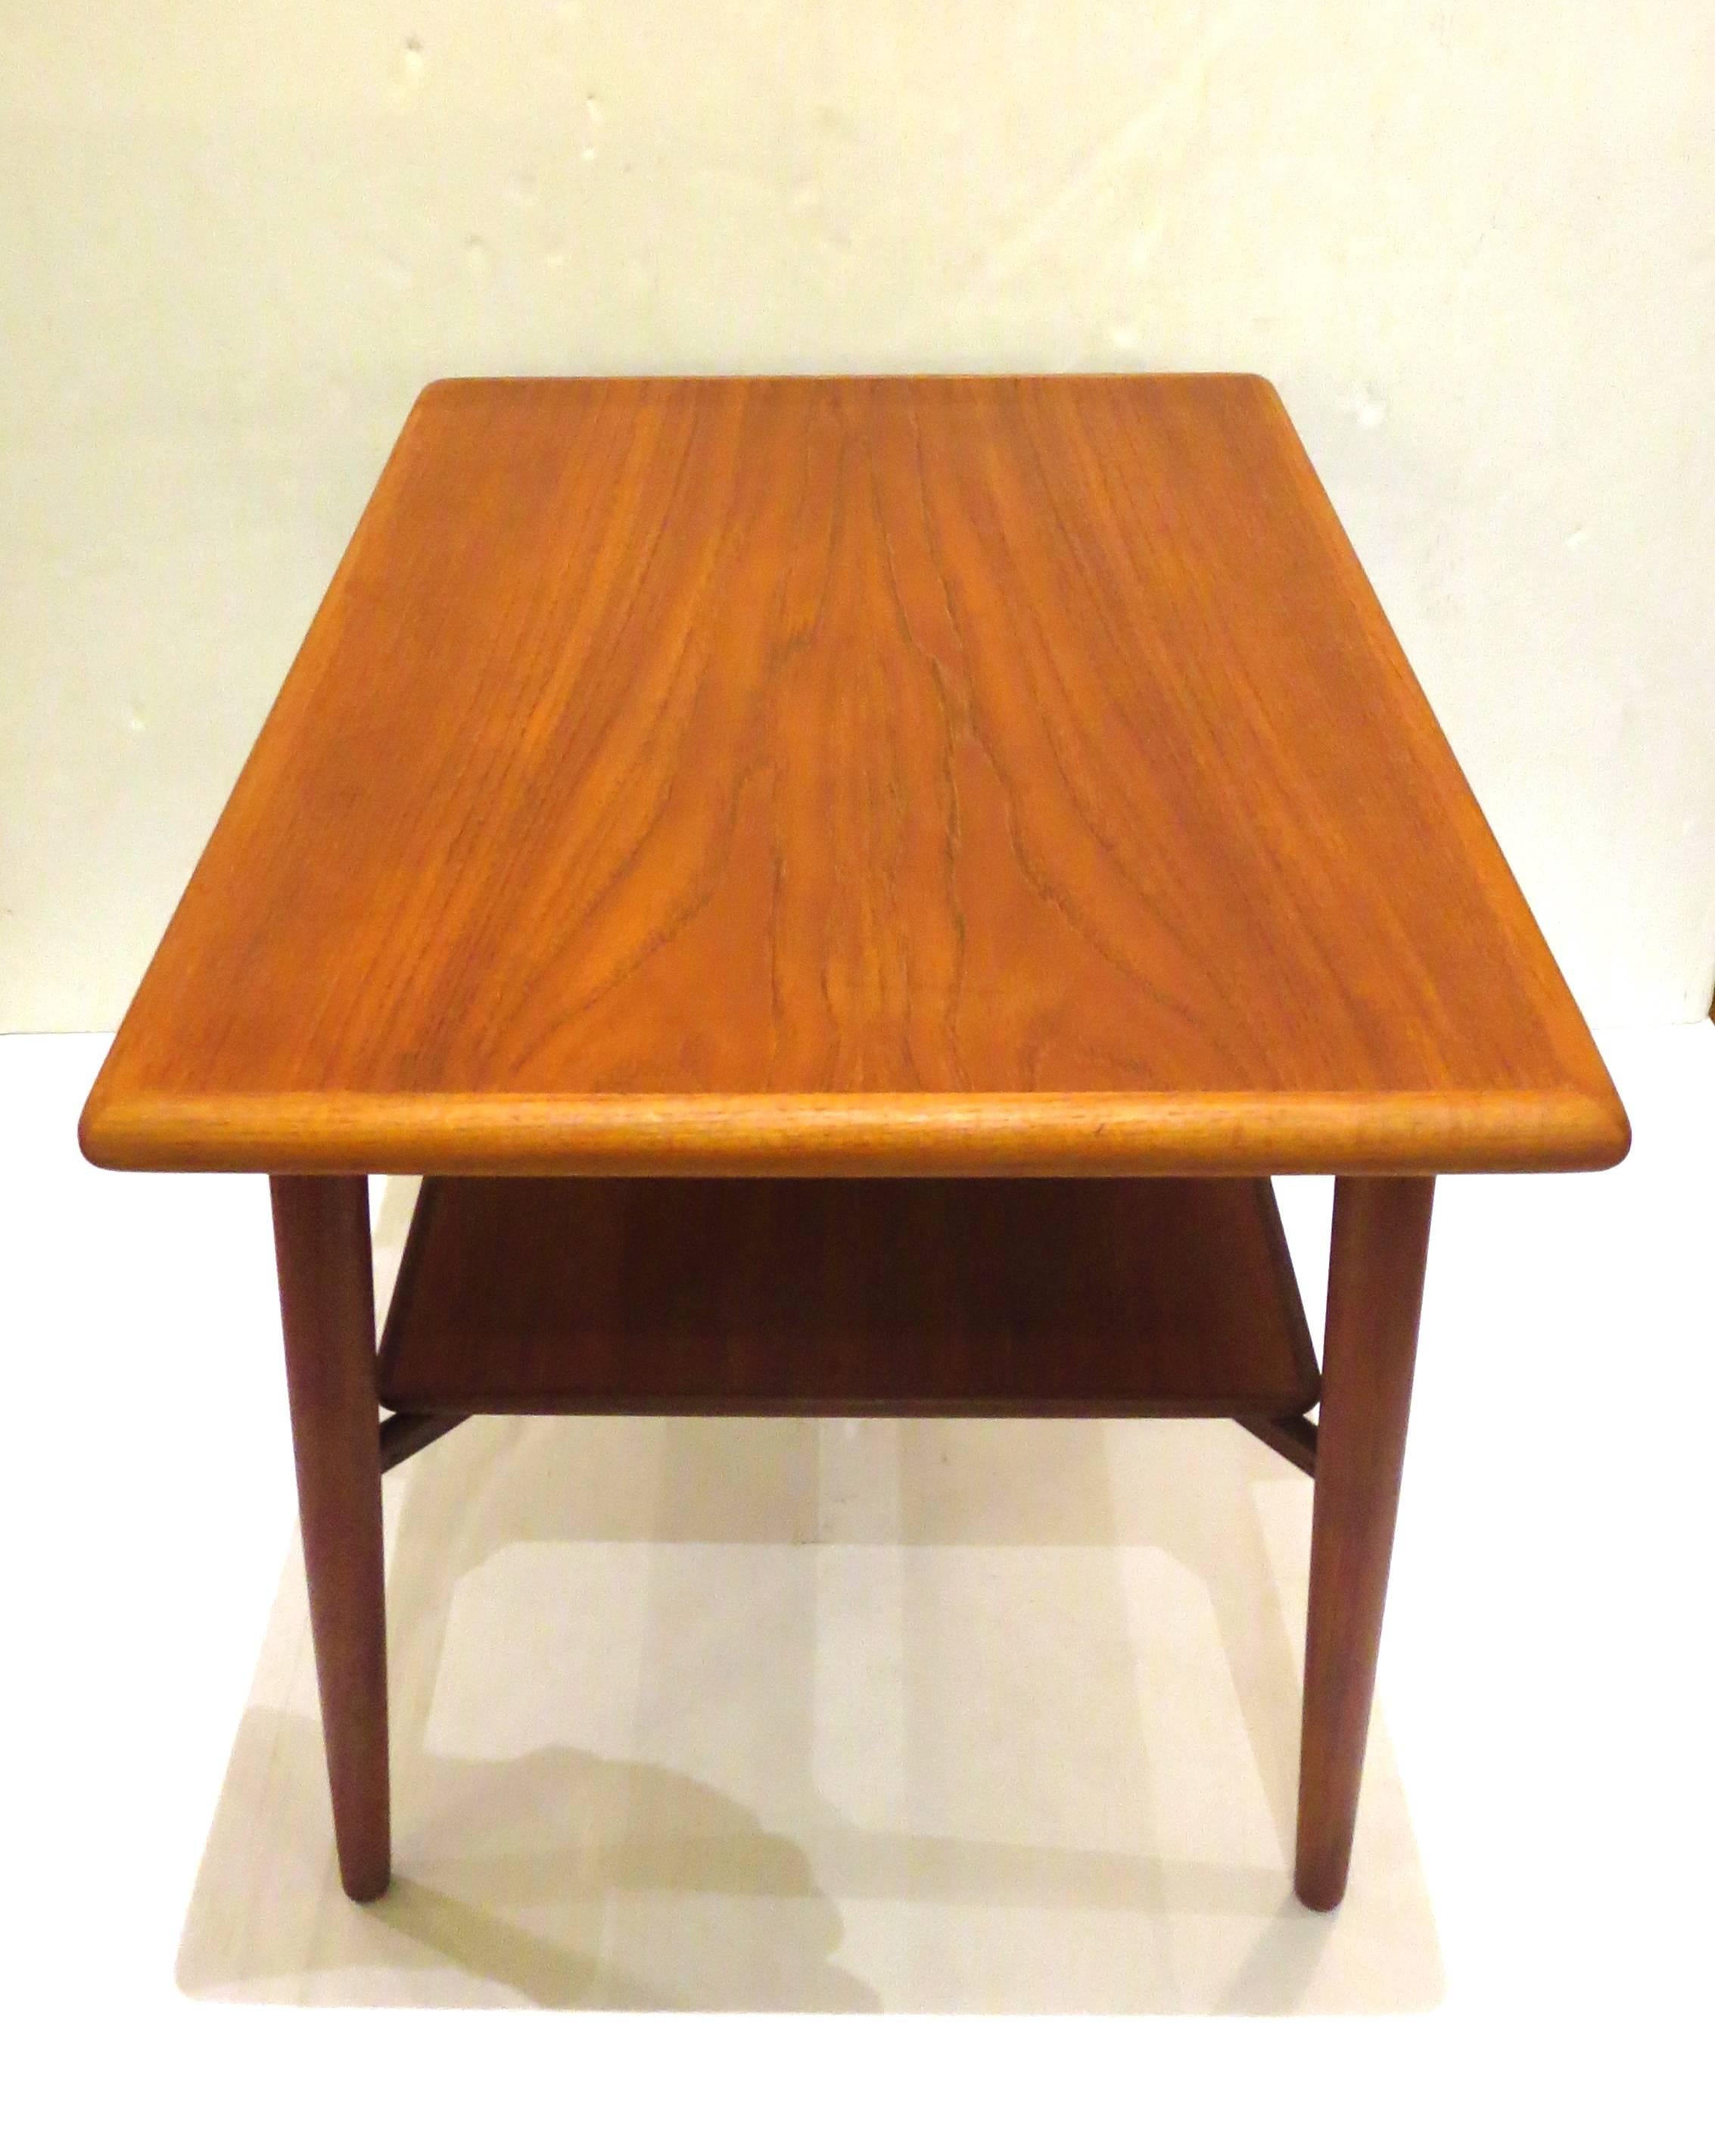 Great lines on this 1950s Danish teak end cocktail table, with shelf on the bottom, solid and sturdy freshly refinished nice grain on wood perfect for a corner or in between two club chairs.